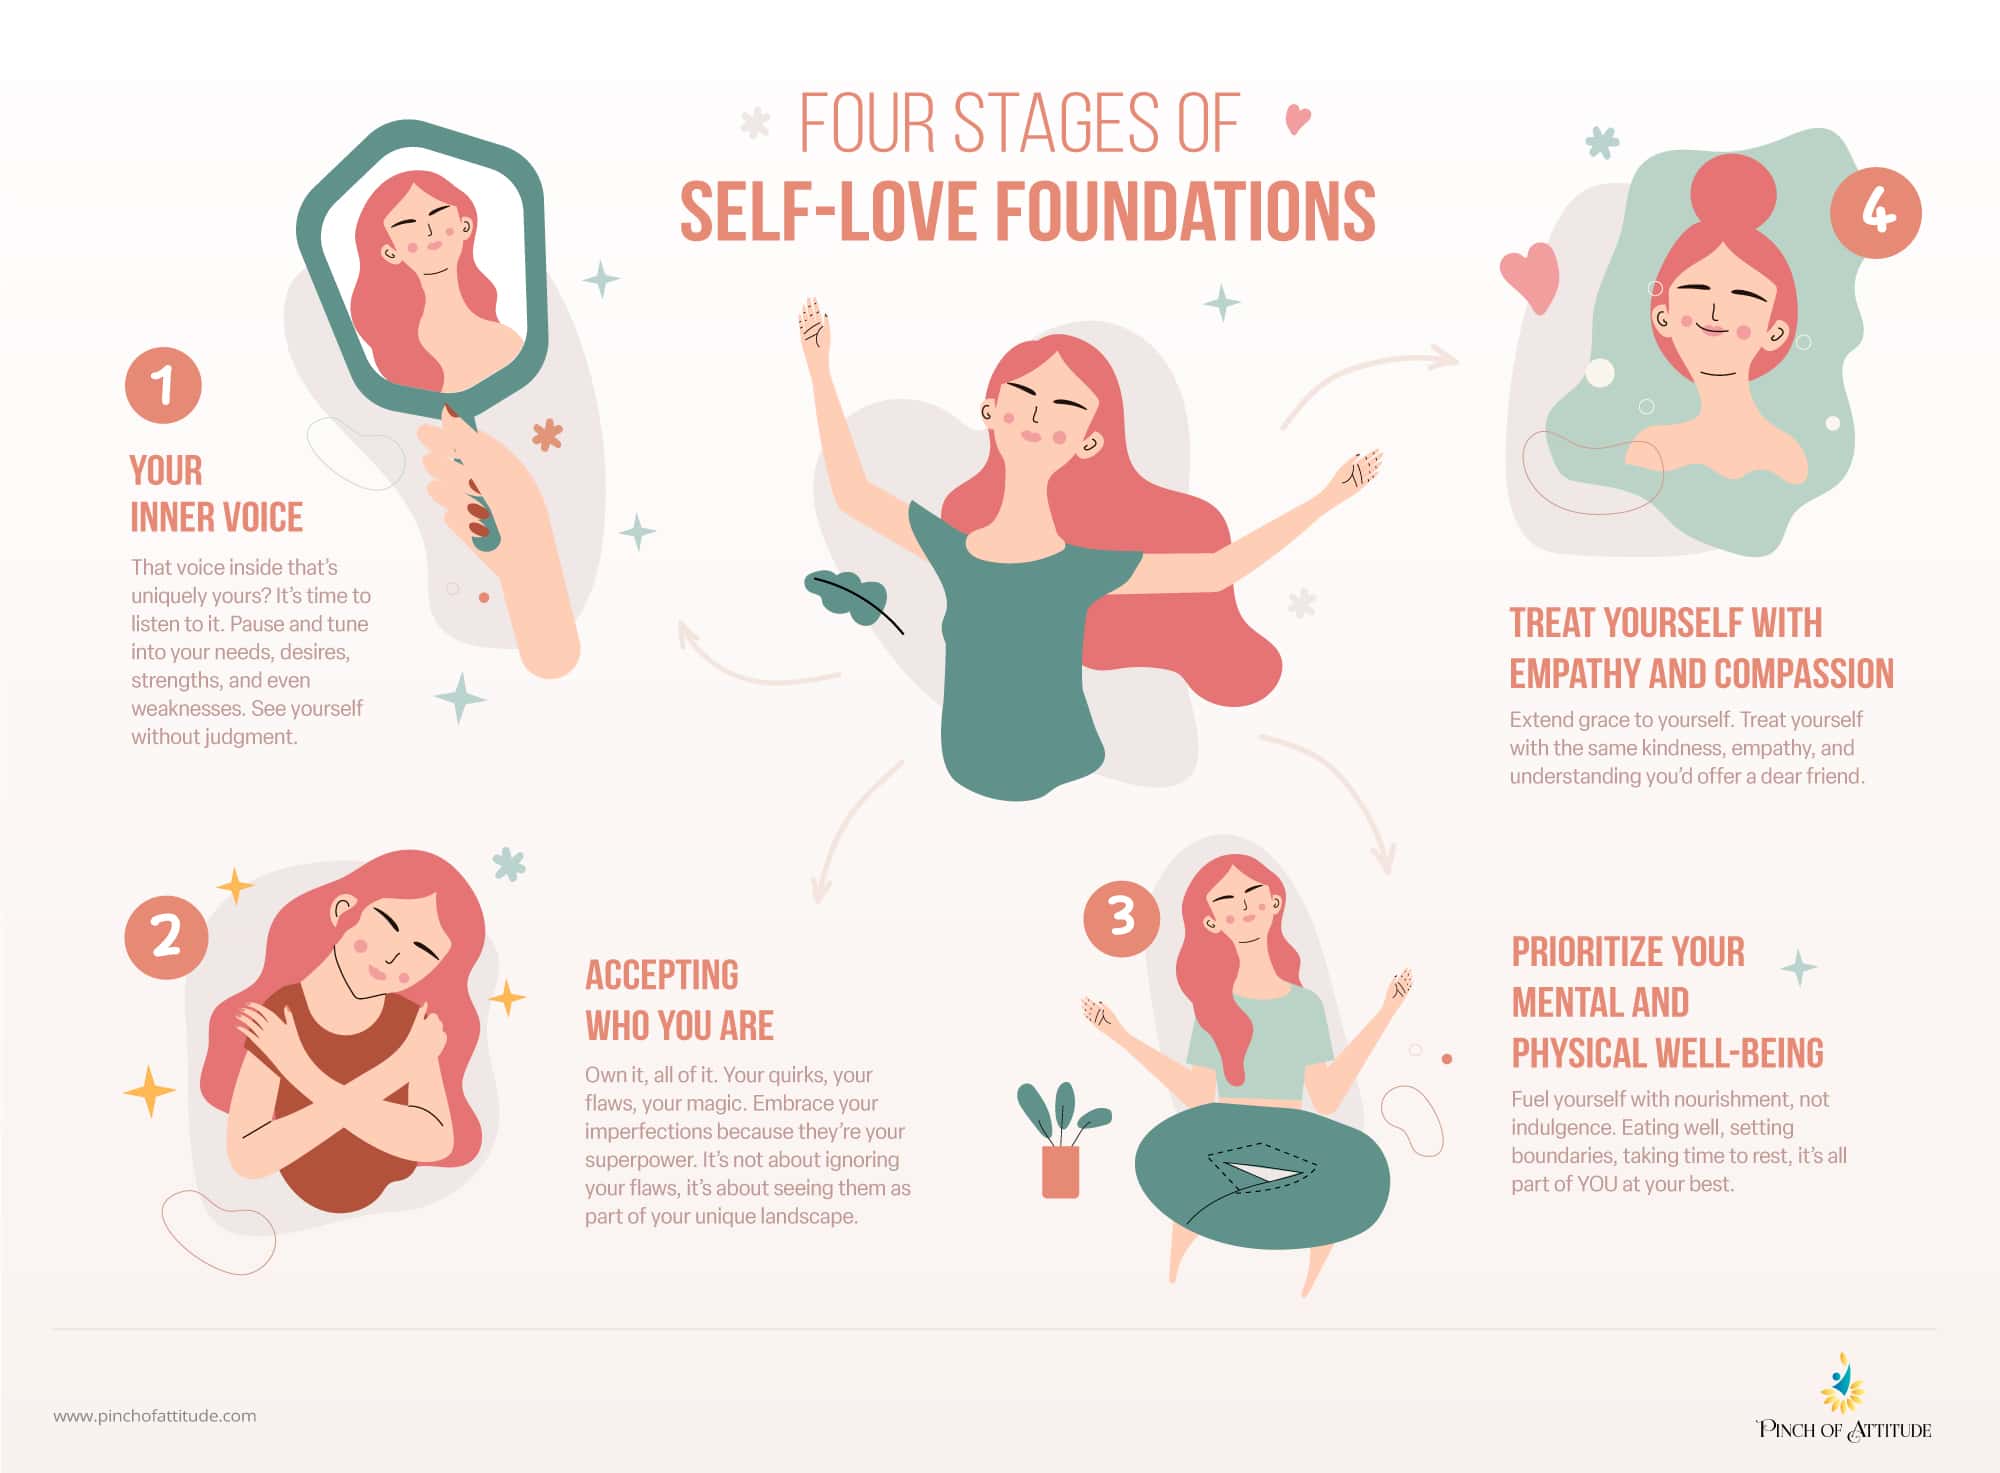 An infographic that outlines the four stages of self-love foundations.